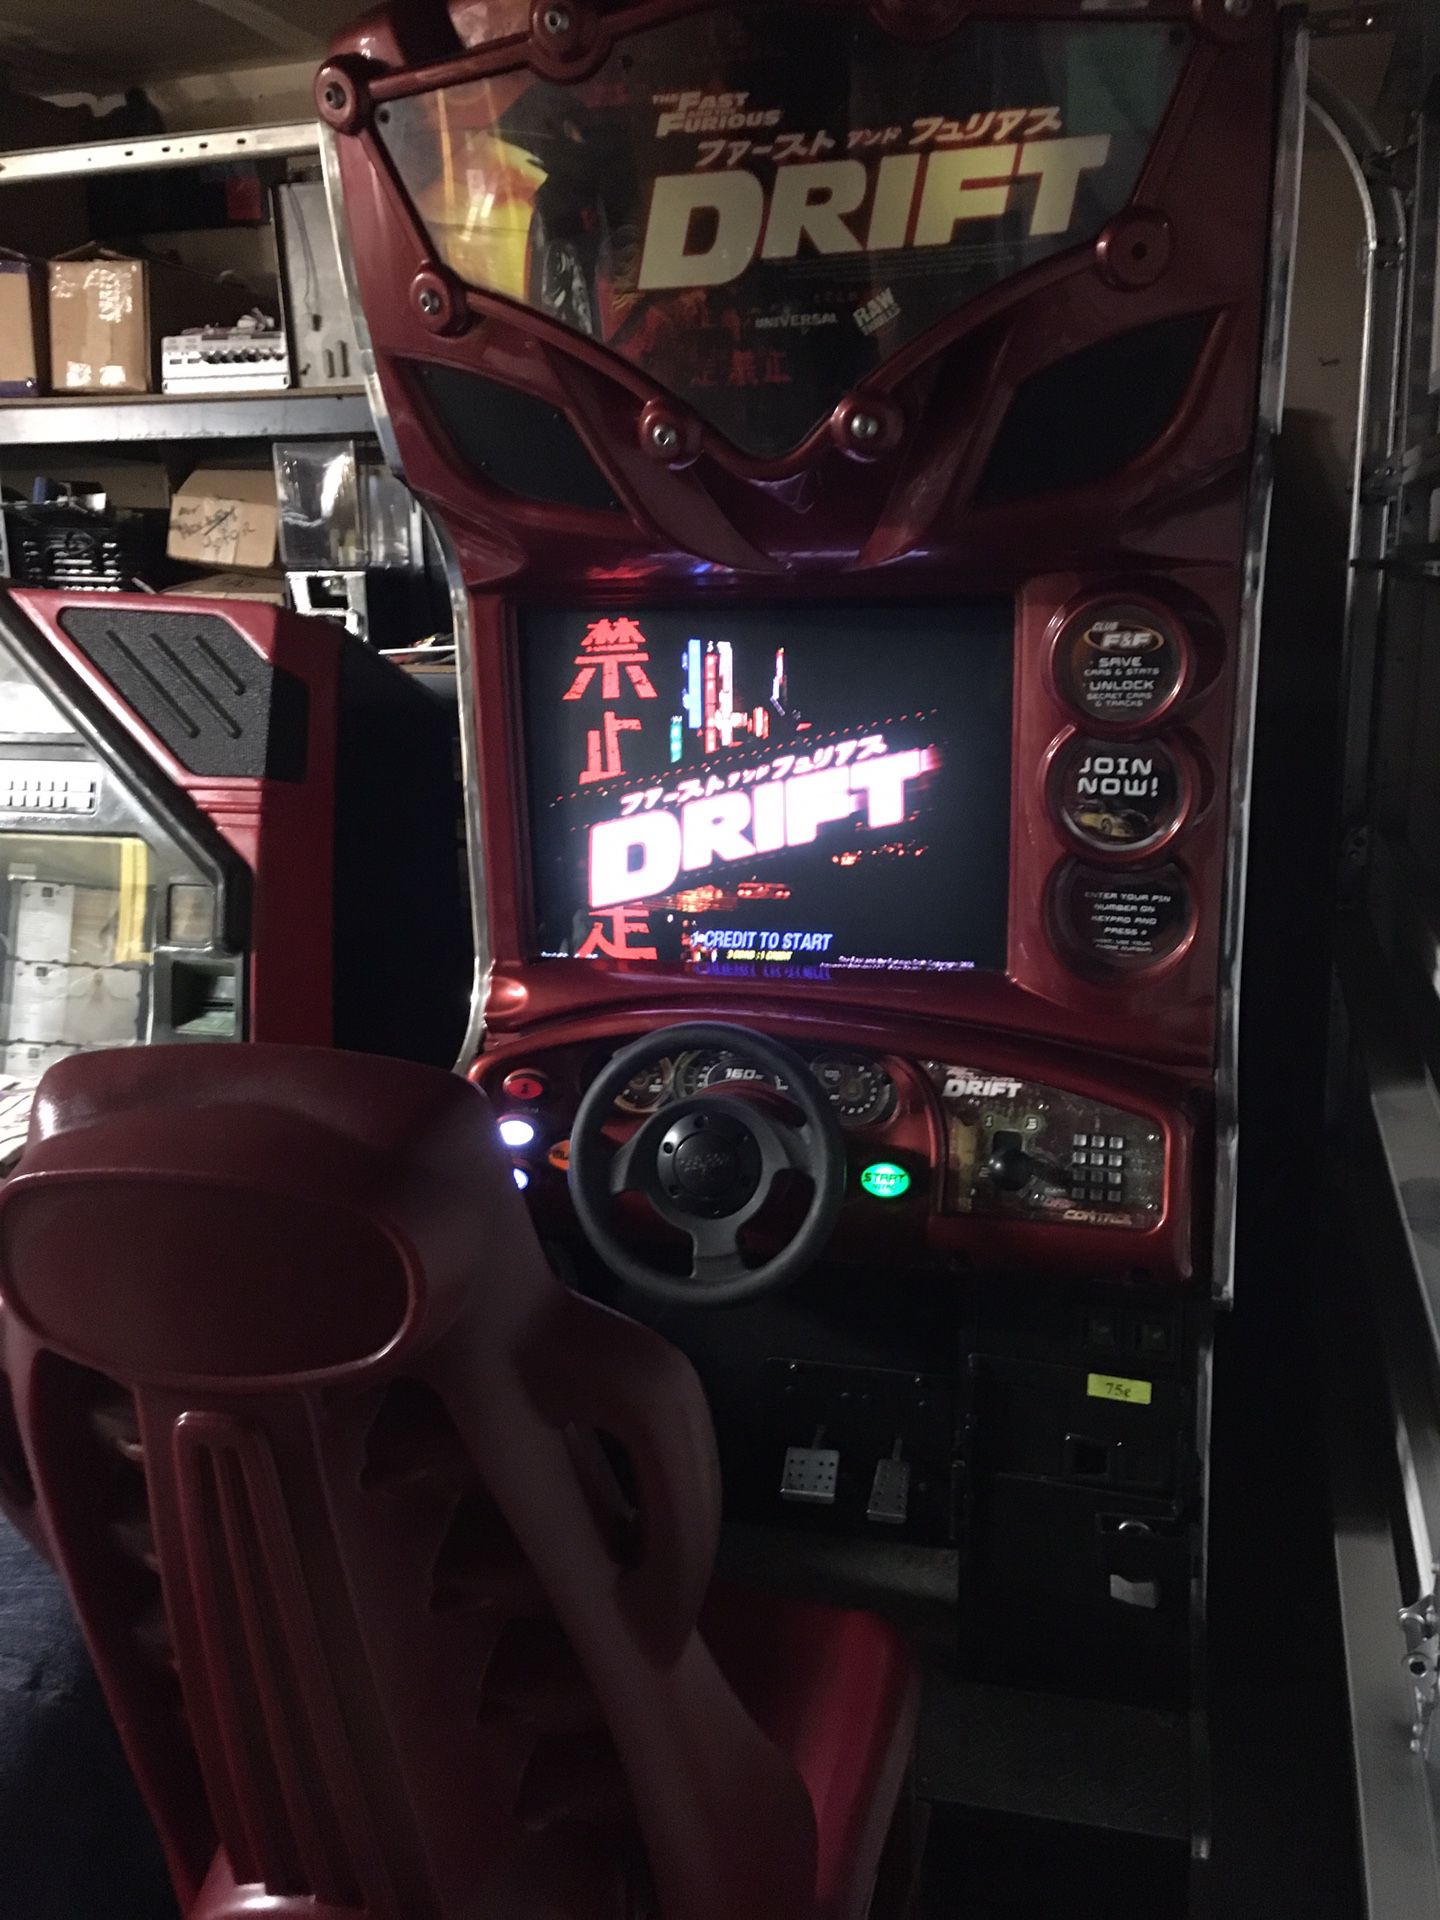 Fast and furious drift dedicated coin operated